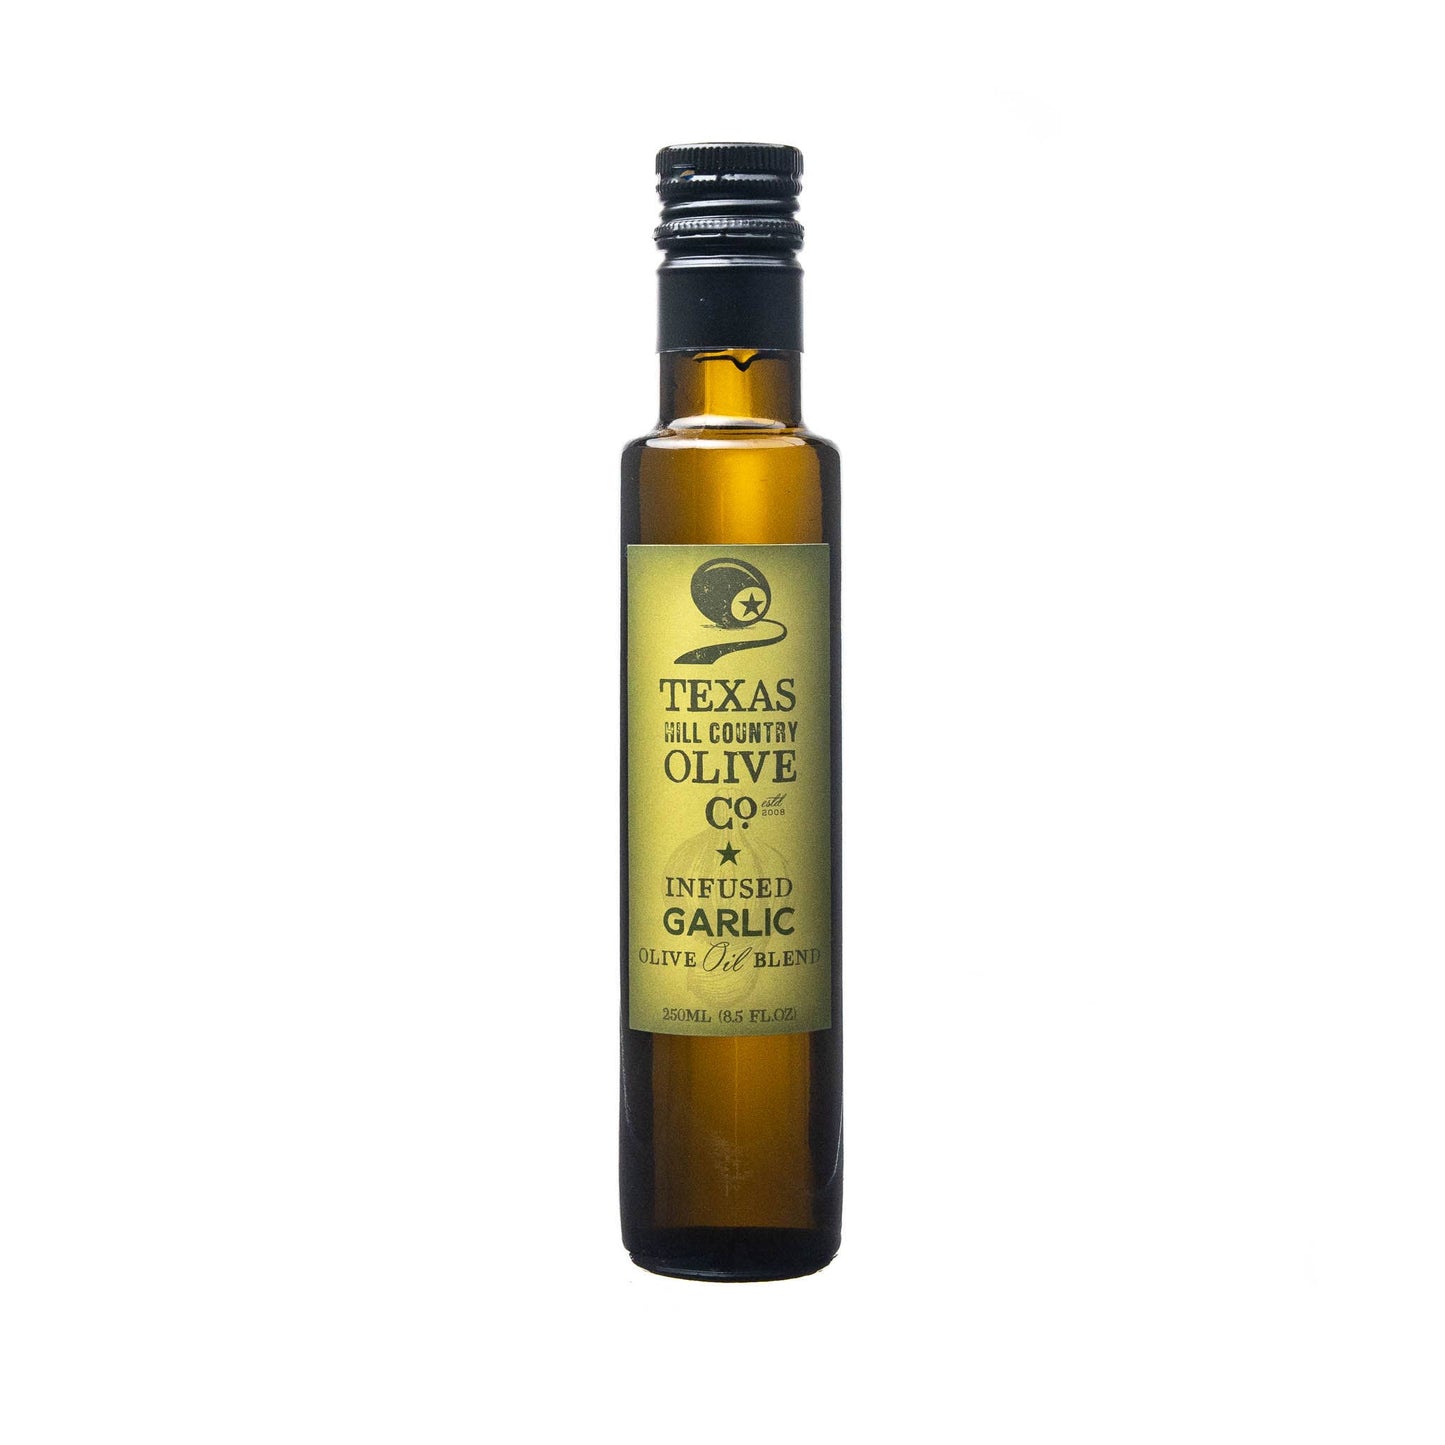 Texas Hill Country Olive Co. - Garlic Infused Olive Oil - 250ml